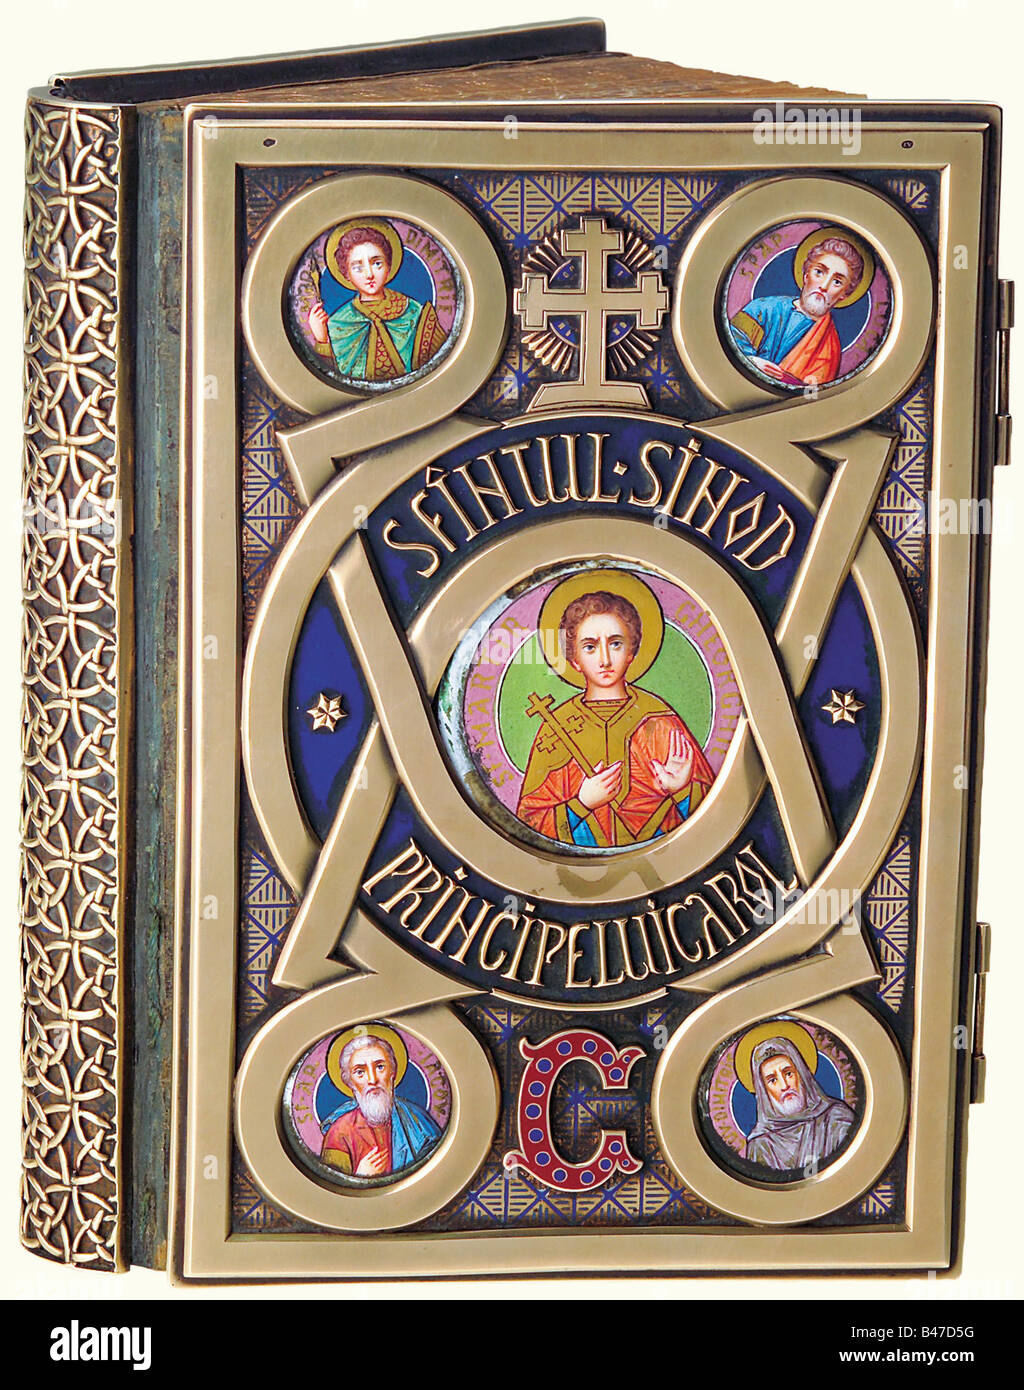 A golden ceremonial prayer book, dated 1900, belonging to Prince Karl von Hohenzollern-Sigmaringen, later King Carl I of Rumania., Heavy gold binding, worked in two layers with the maker's mark 'ZV' and a fox head between the ciphers 'A 4' (Inspection mark for Scheibbs/Austria for 14 carat gold objects historic, historical, 1900s, 20th century, Prussian, Prussia, German, Germany, militaria, military, object, objects, stills, clipping, clippings, cut out, cut-out, cut-outs, book, books, literature, Stock Photo